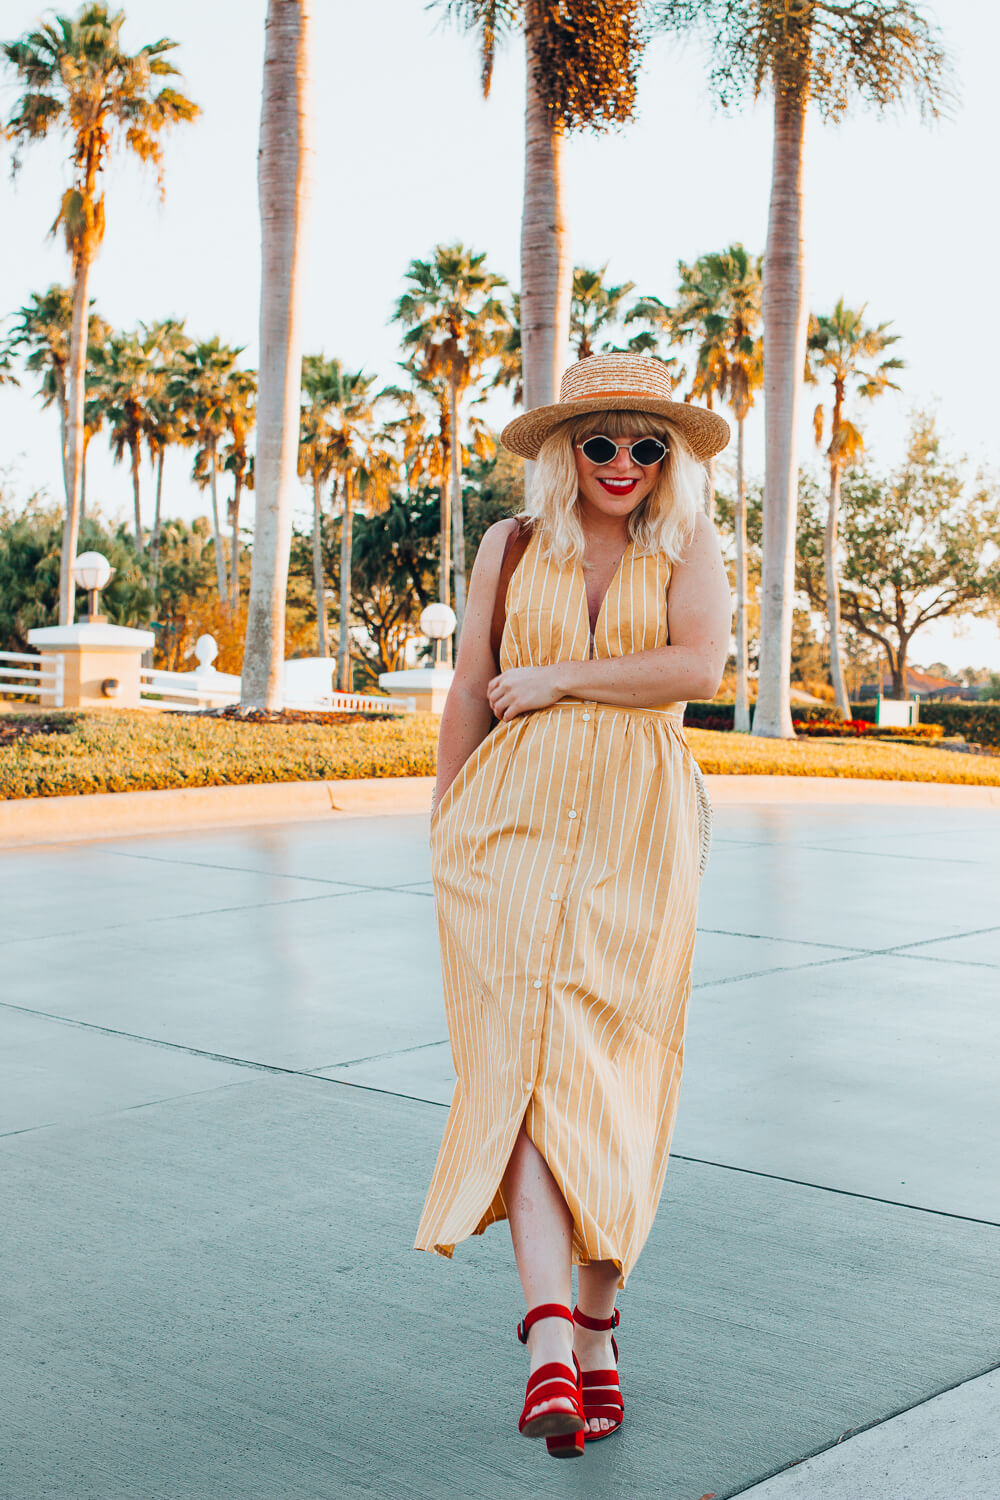 25 Spring Midi Dresses Under $100 | Coming in Clutch